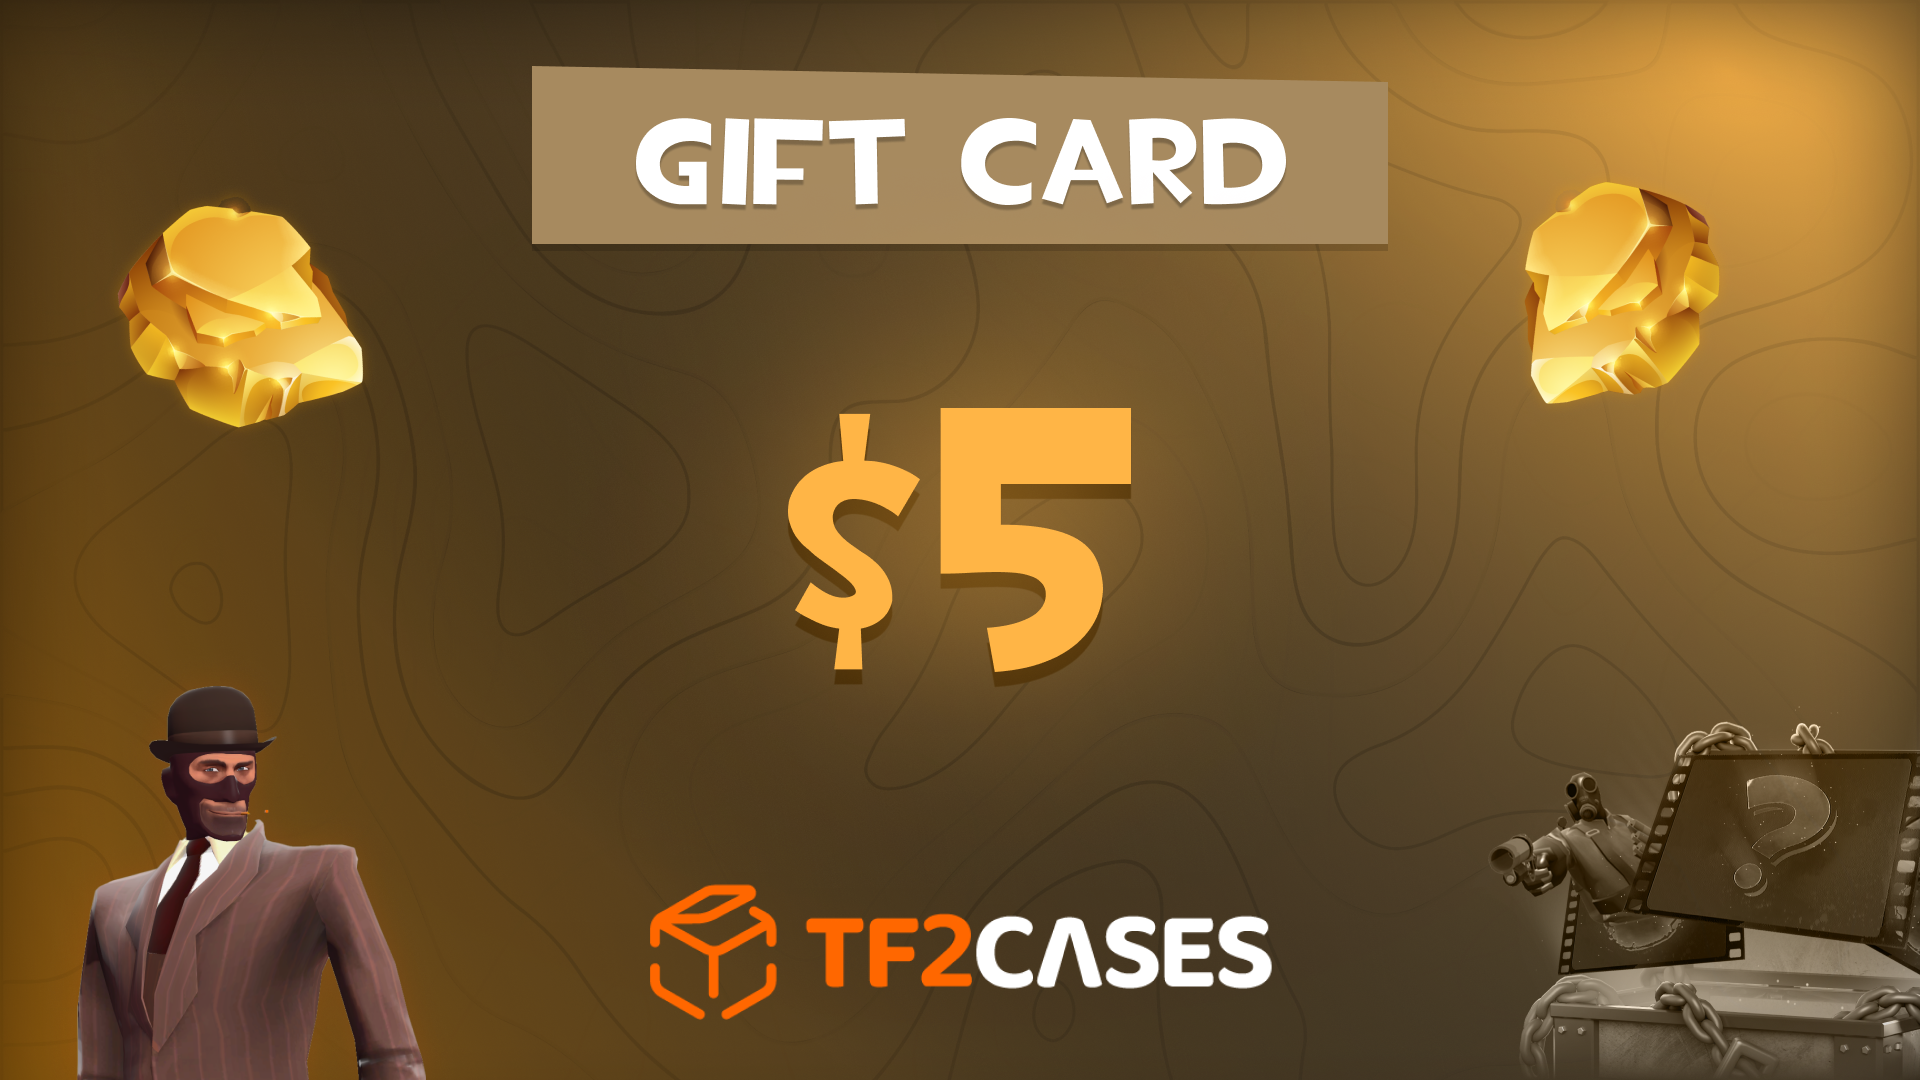 TF2CASES.com $5 Gift Card [$ 5.65]